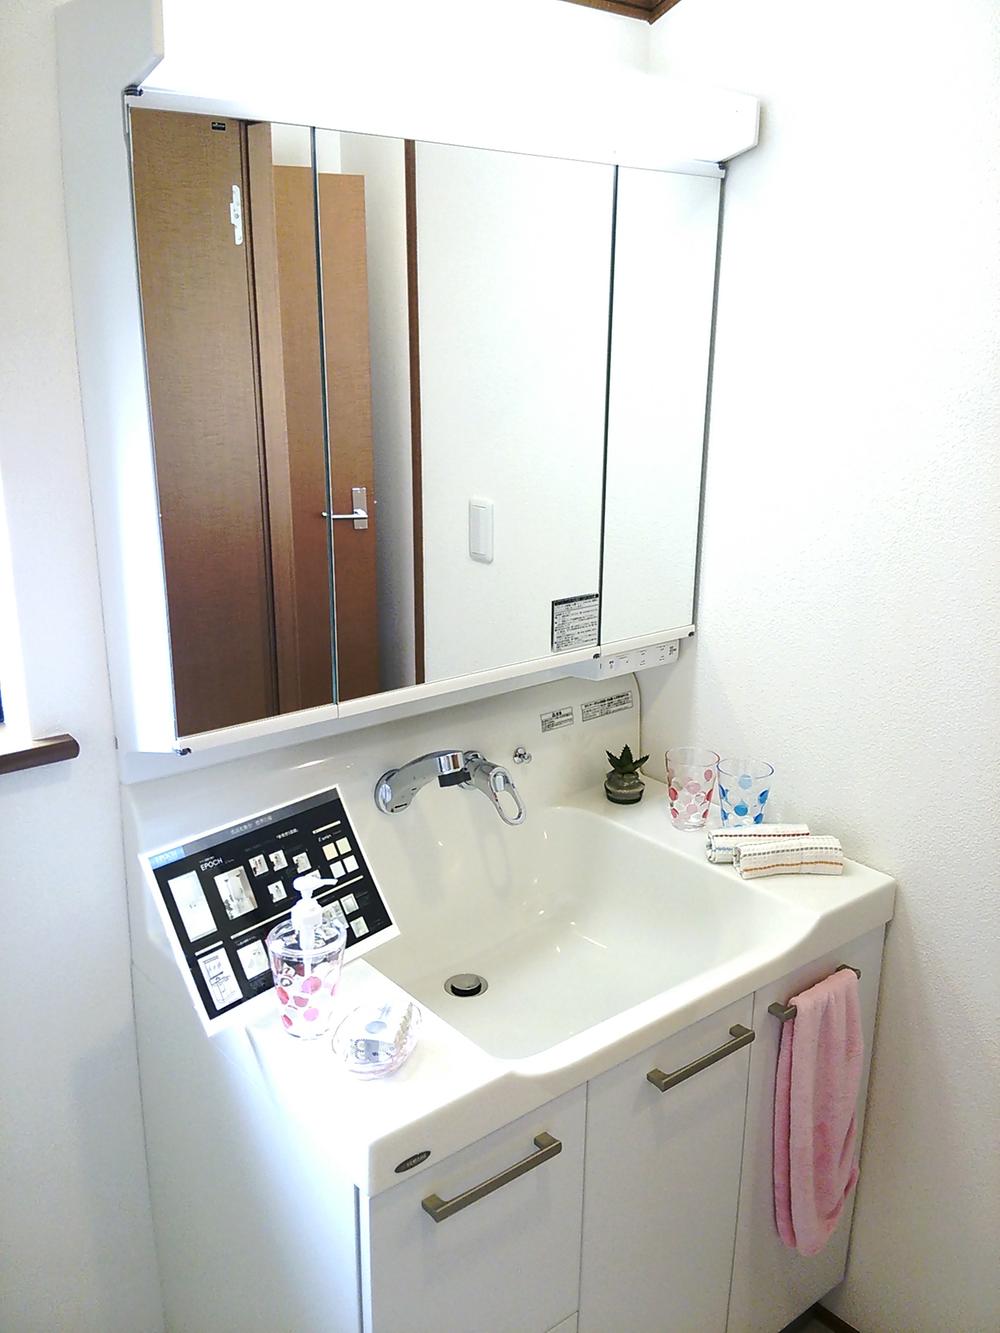 Wash basin, toilet. Vanity is three-sided mirror type, There is also a storage capacity.